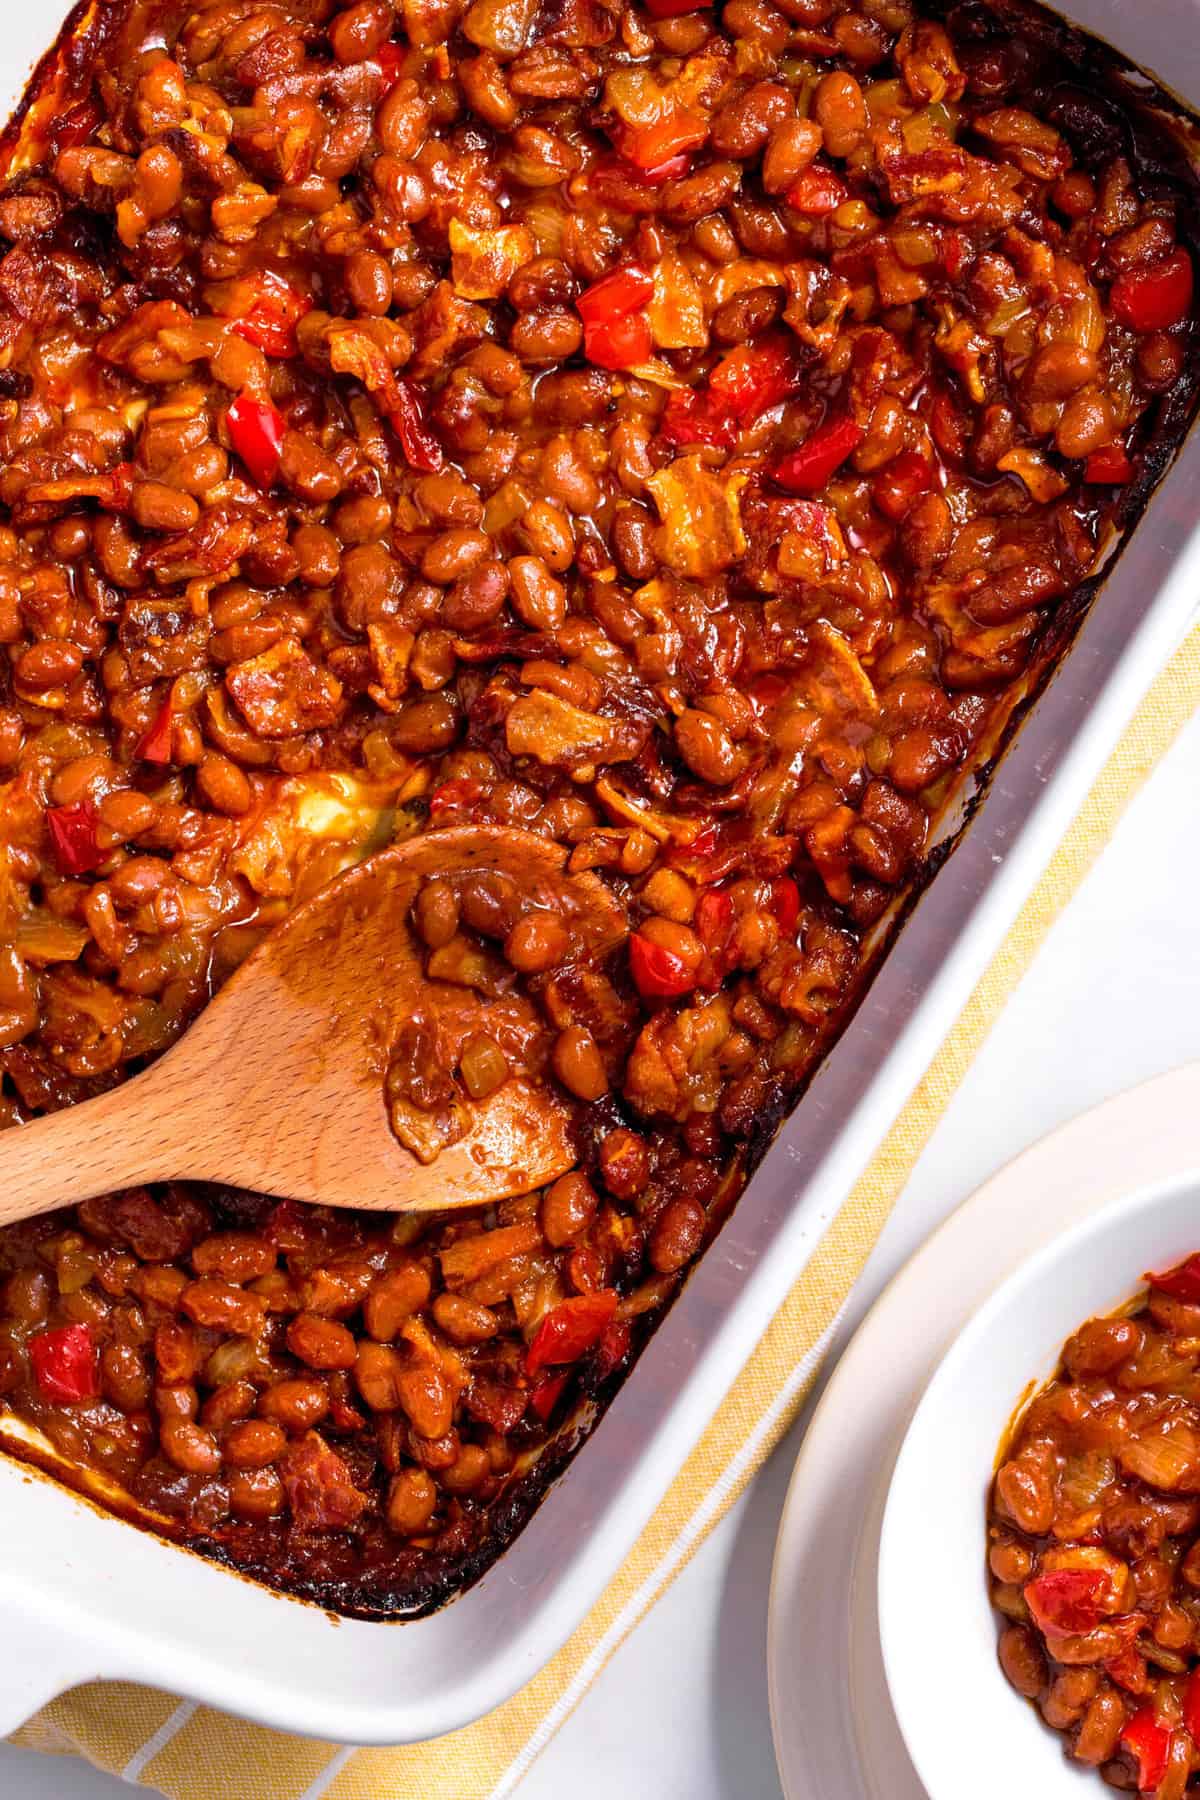 top down image of baked beans in a casserole dish